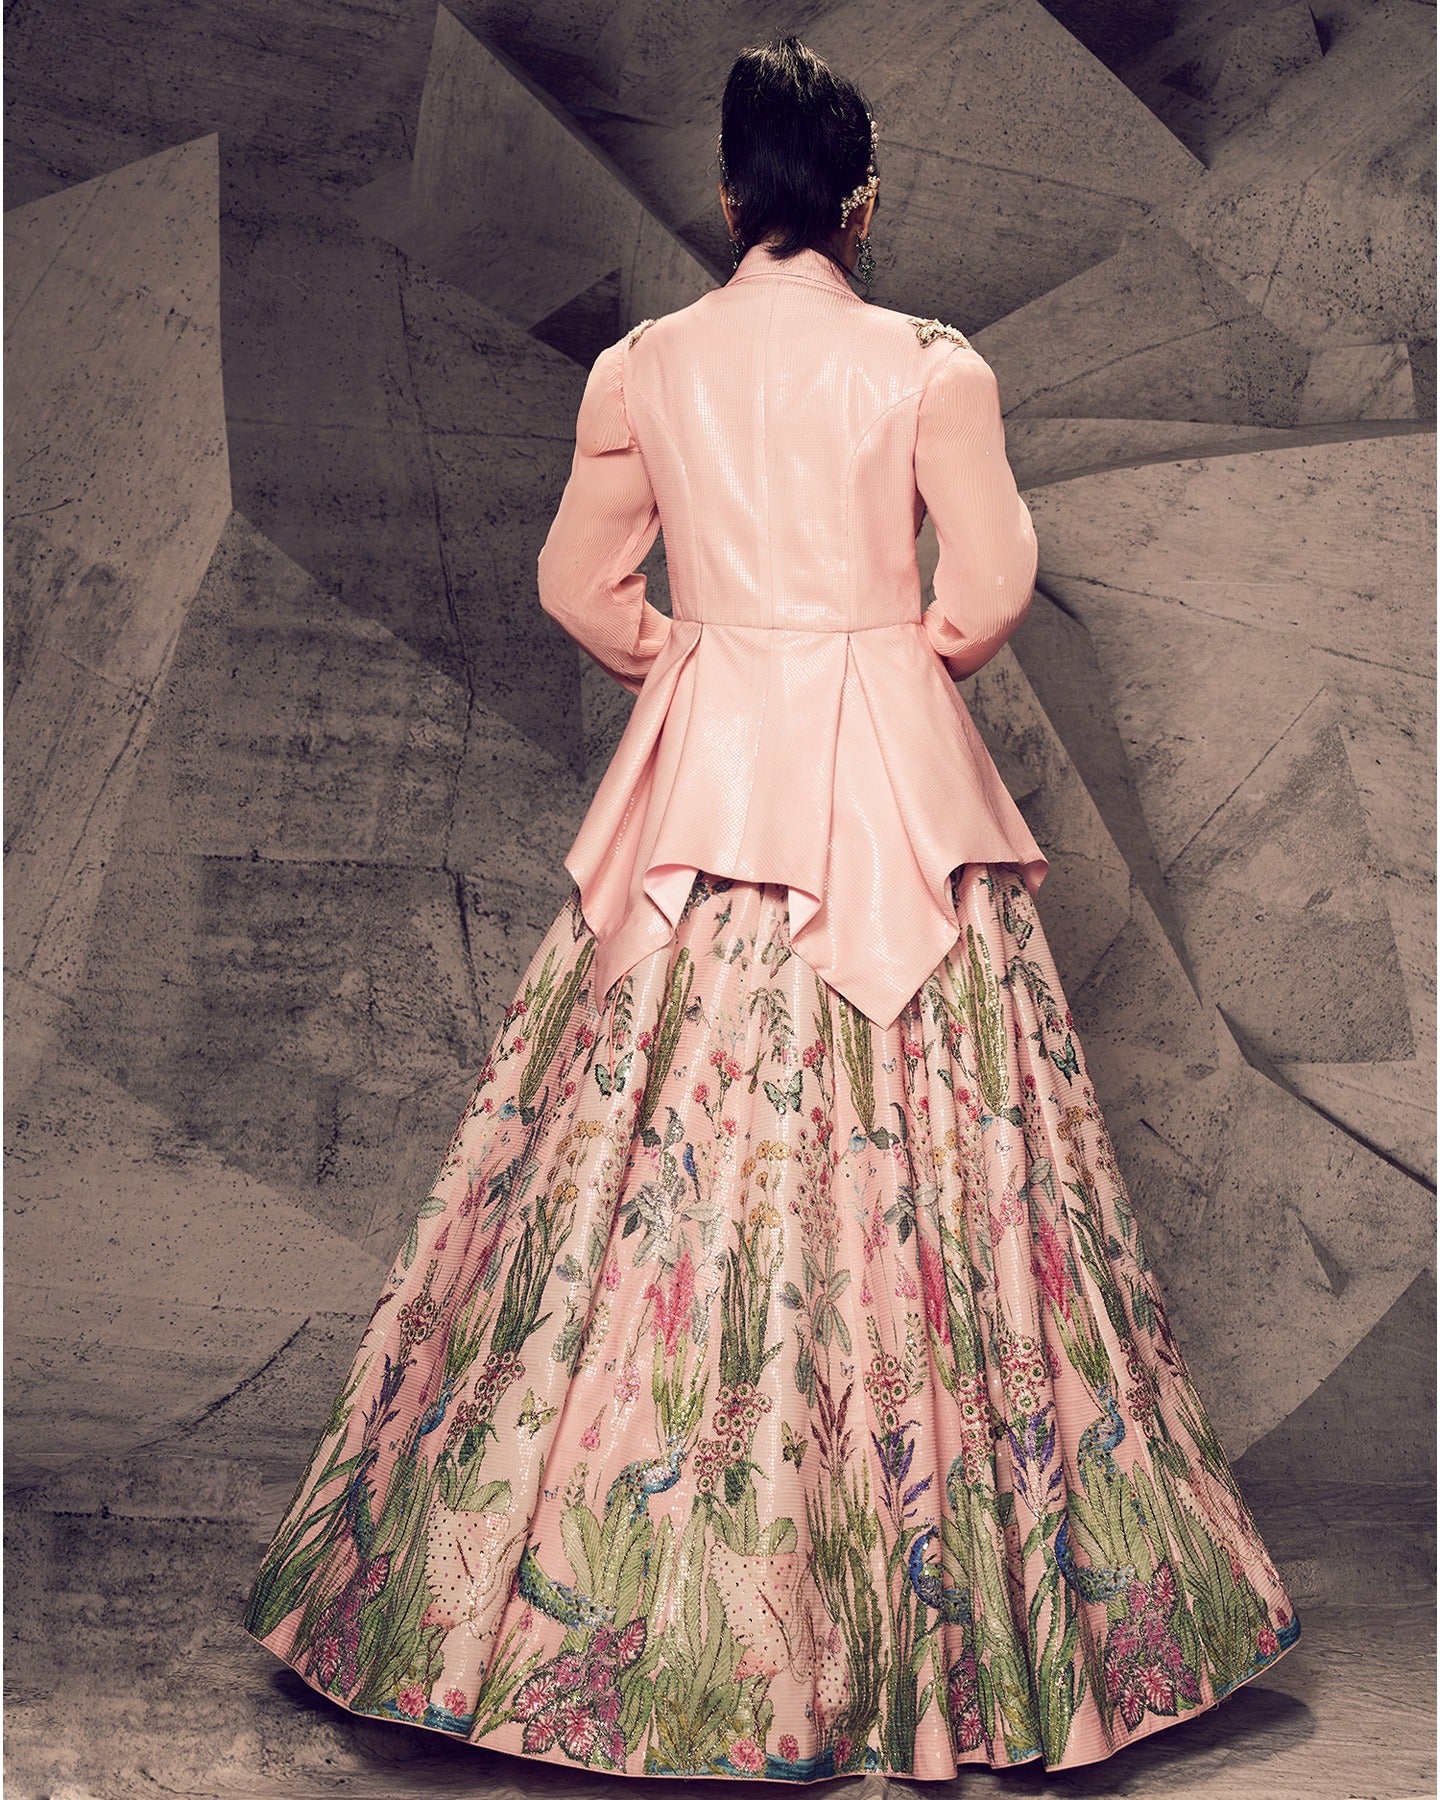 Blossoming in the elegance of pink florals, this blazer lehenga ensemble is a garden of sophistication and style.